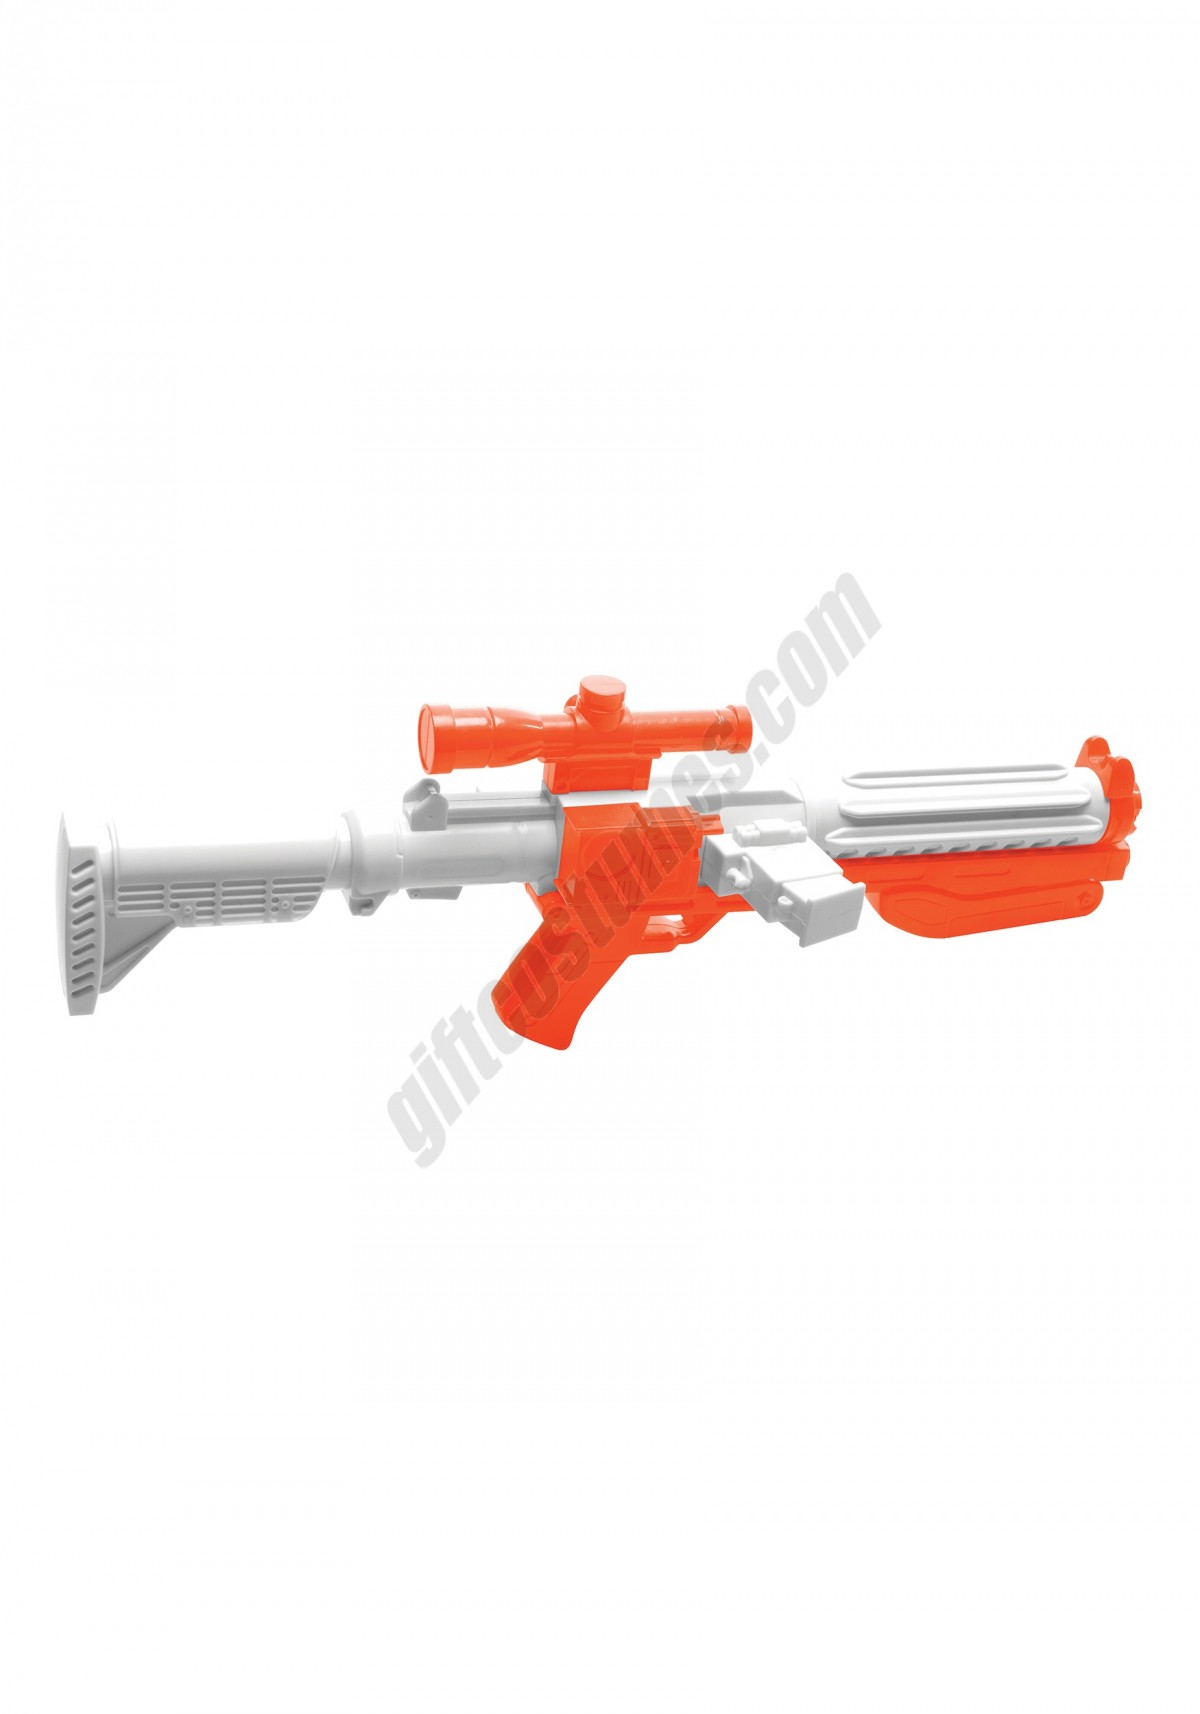 Star Wars The Force Awakens Stormtrooper Blaster Accessory Promotions - -0